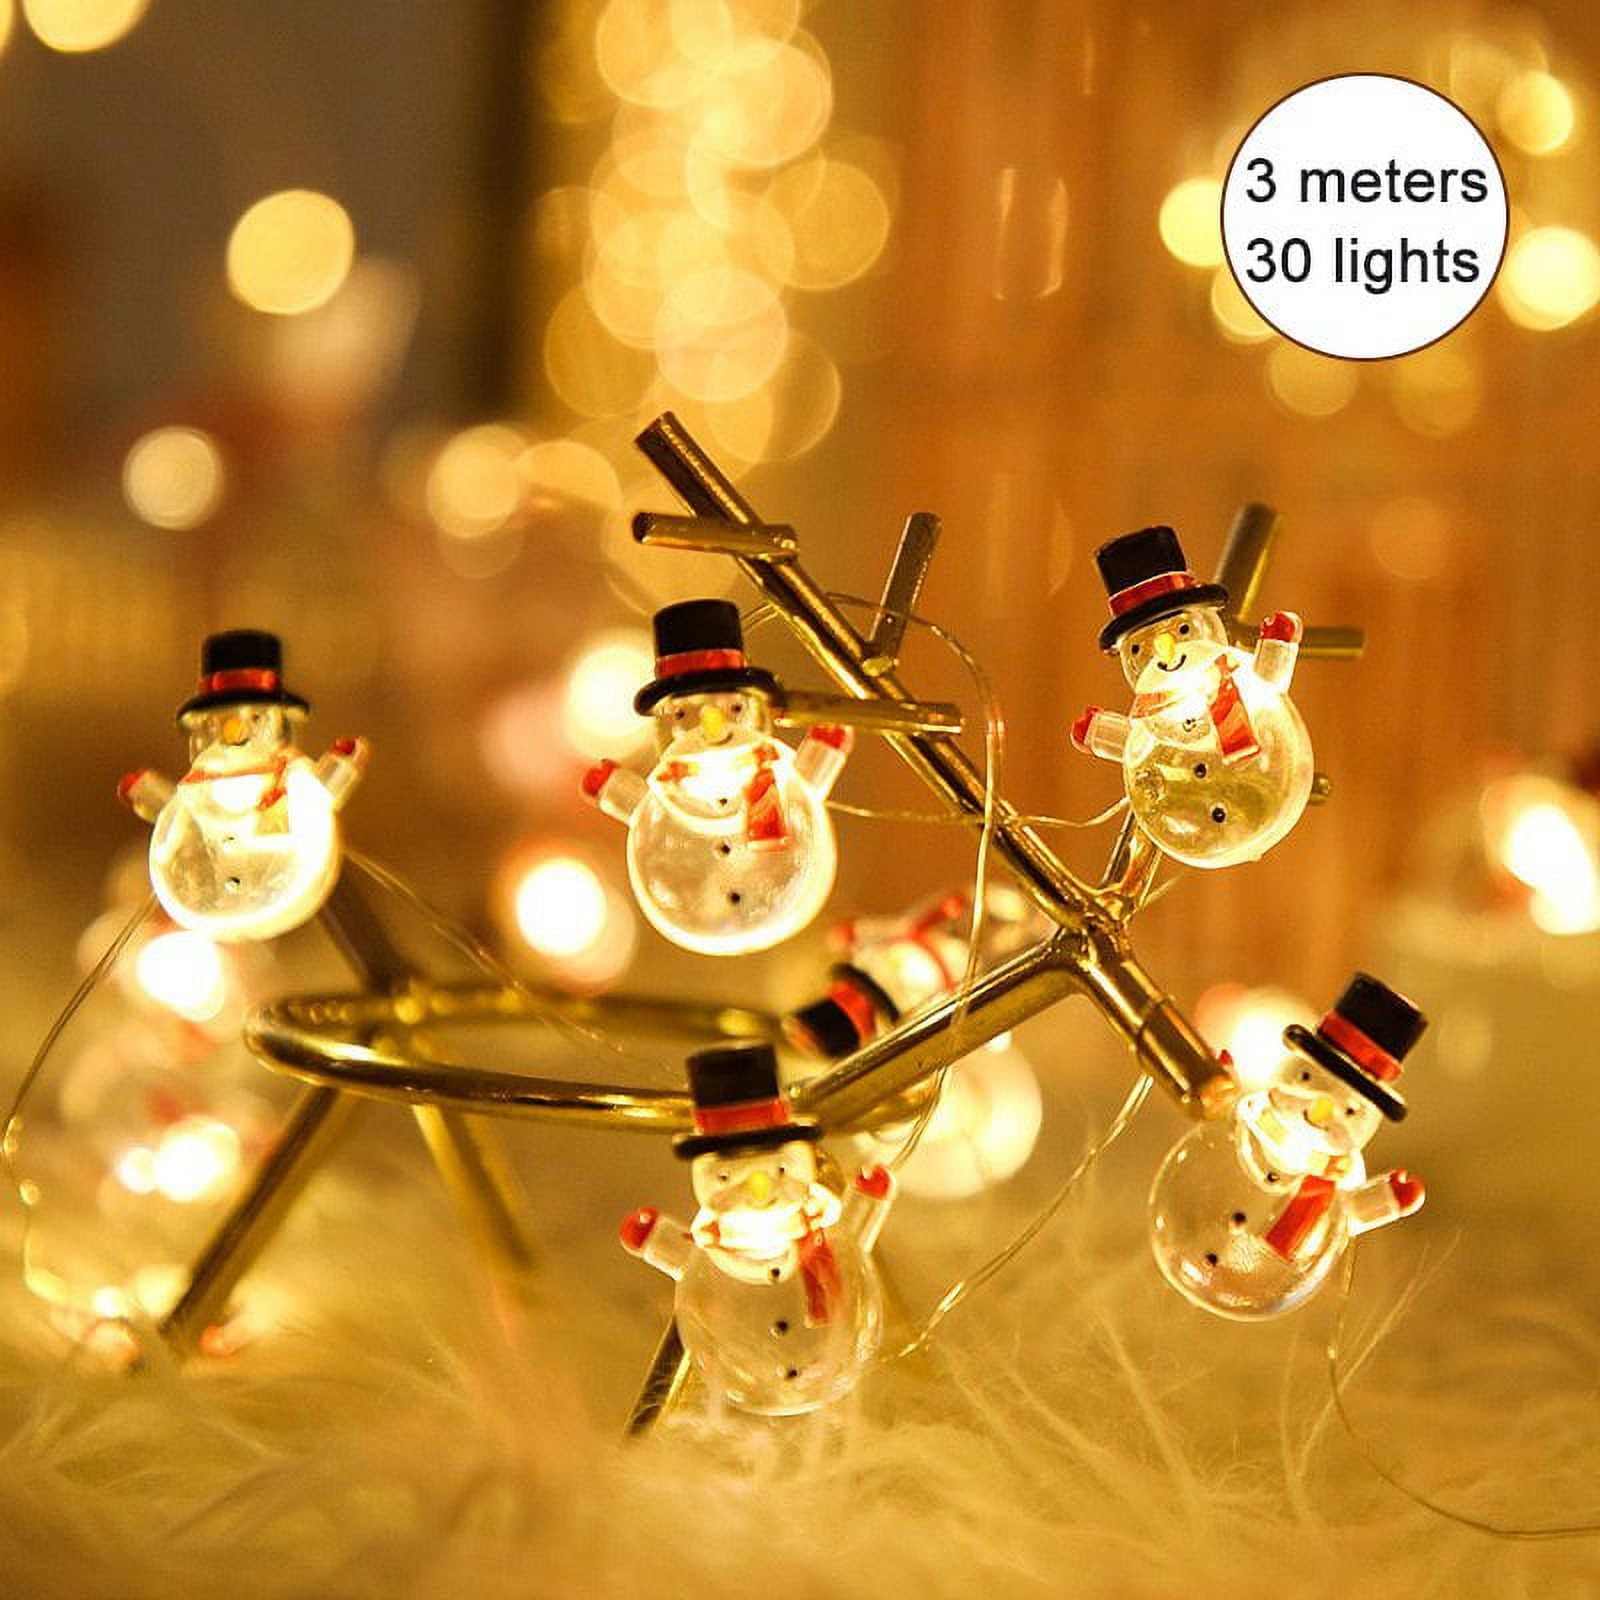 LED Mini Lantern Fairy Lights Battery 20 LEDs 3 Meters with Timer Warm  White Holiday String Lights for Outdoors and Indoors